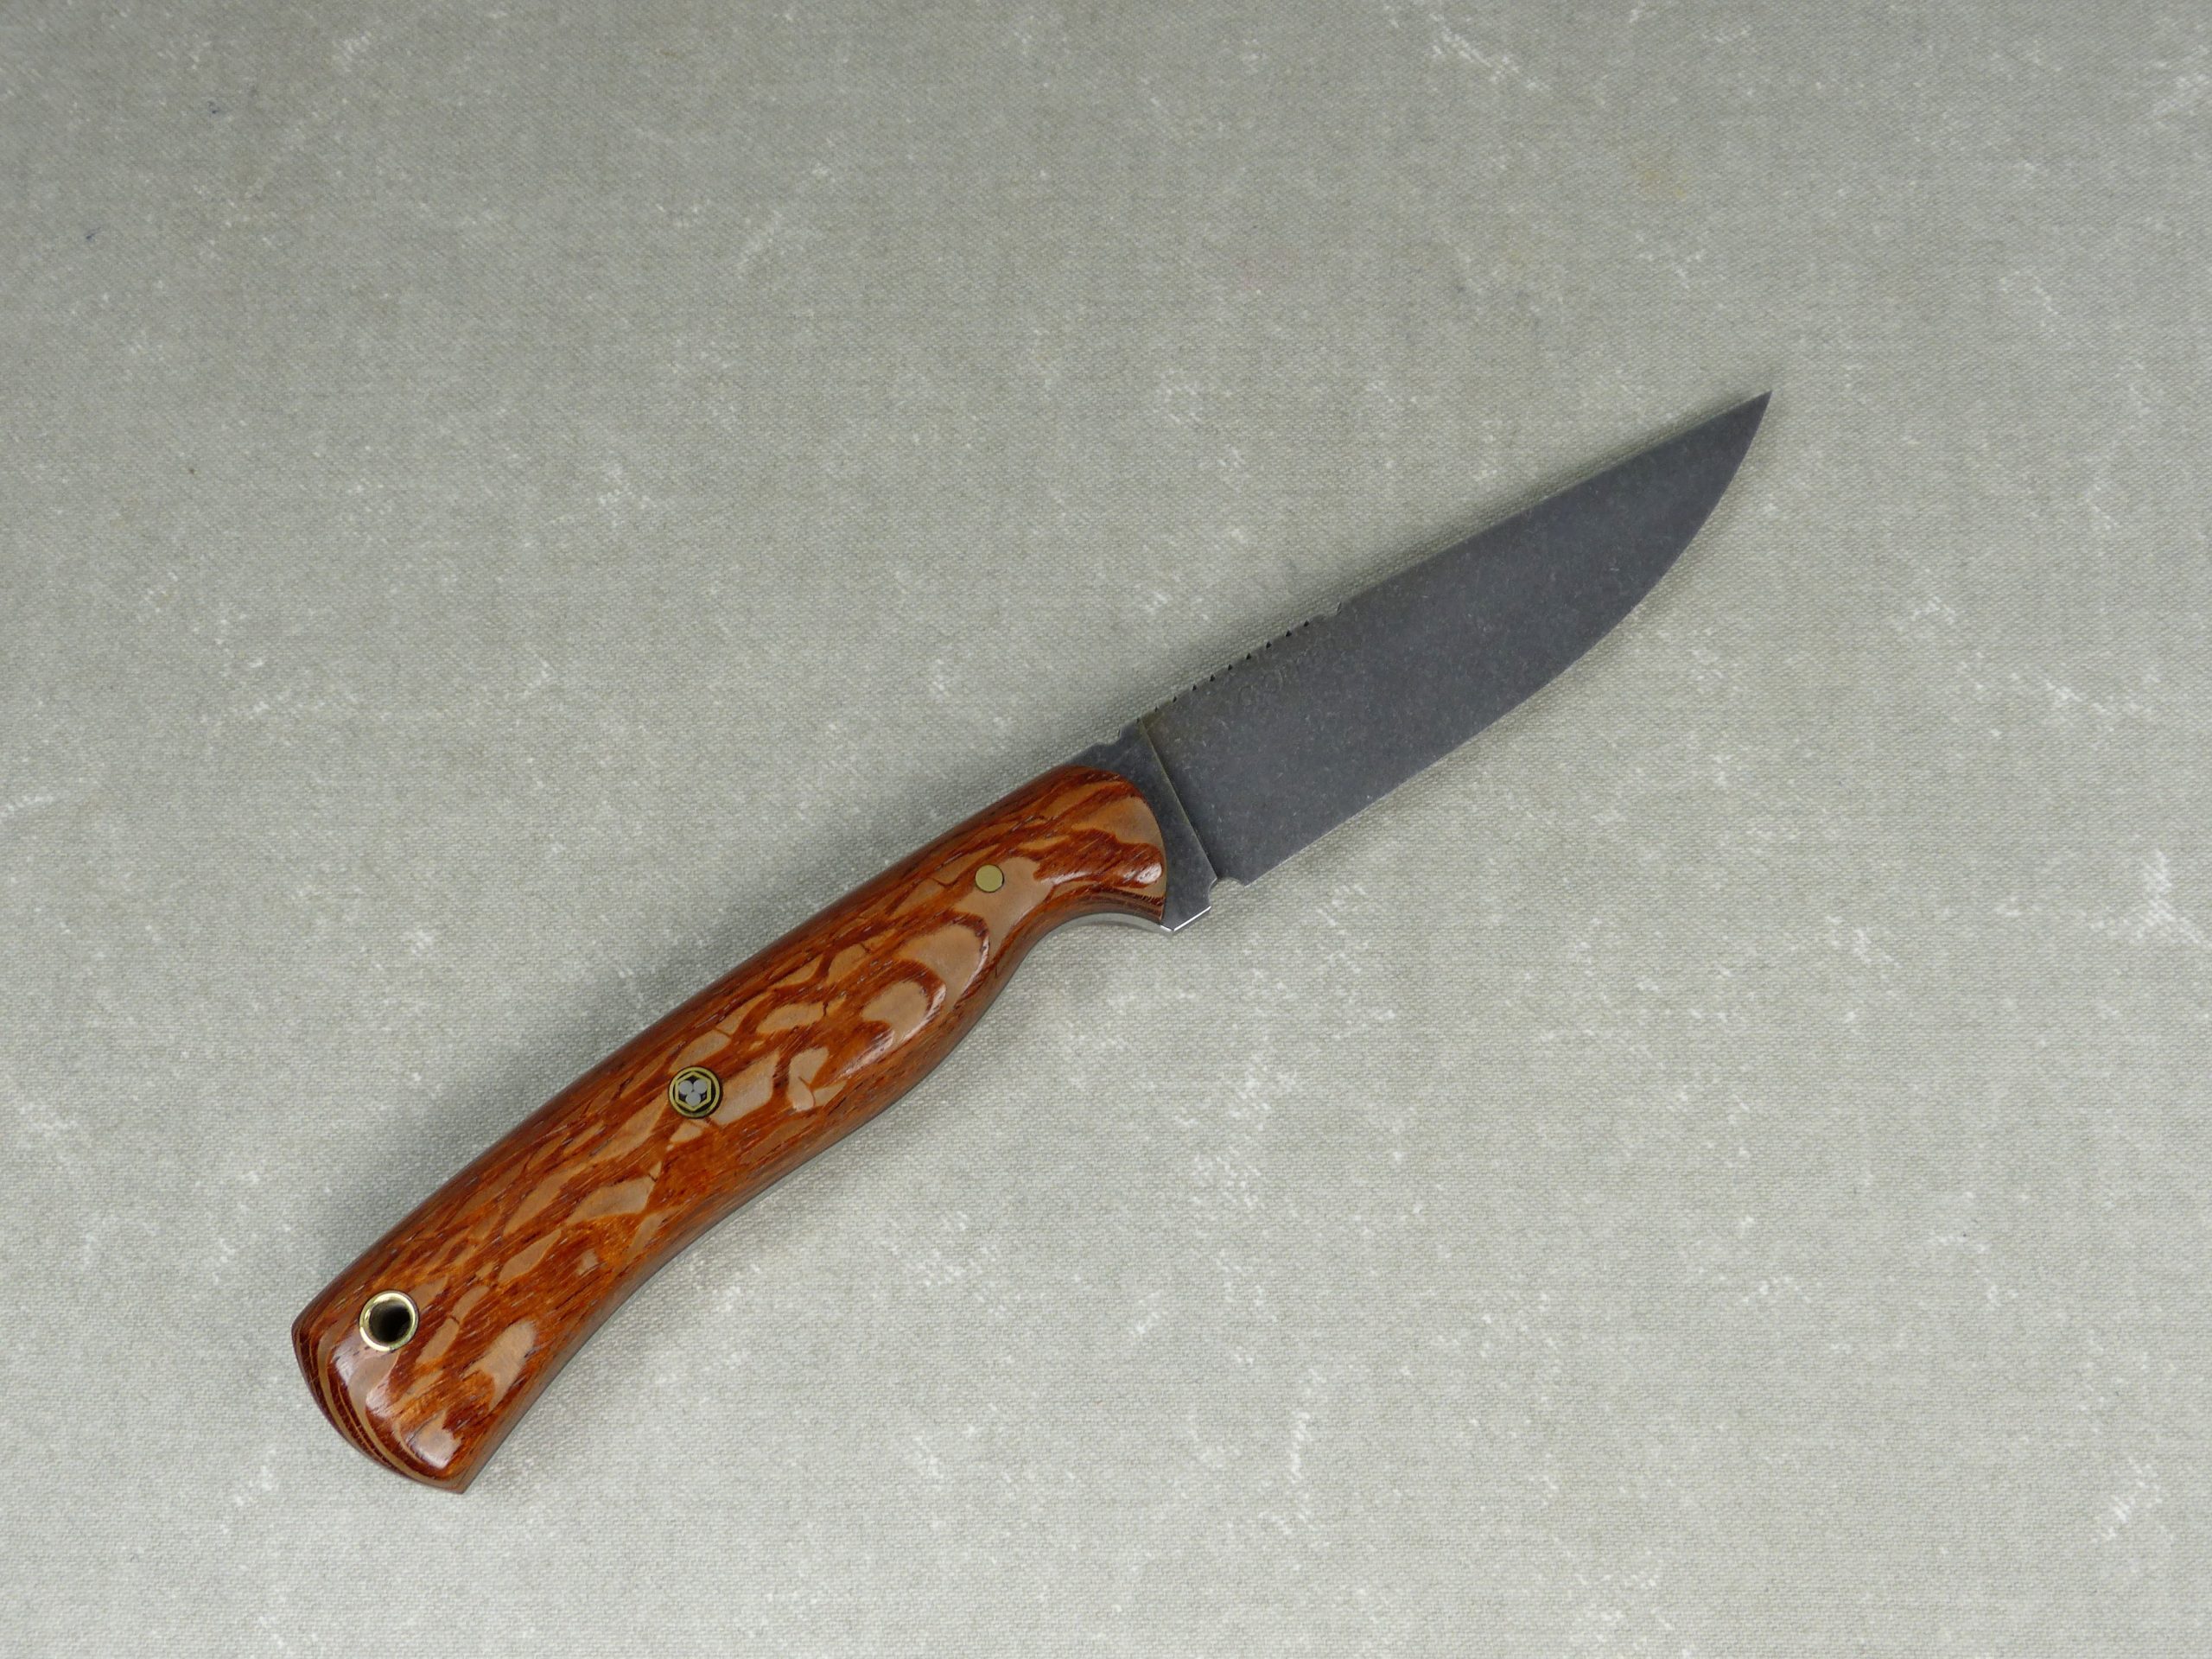 SW4 - Handmade everyday carry knife with Australian lacewood handle and stonewashed blade